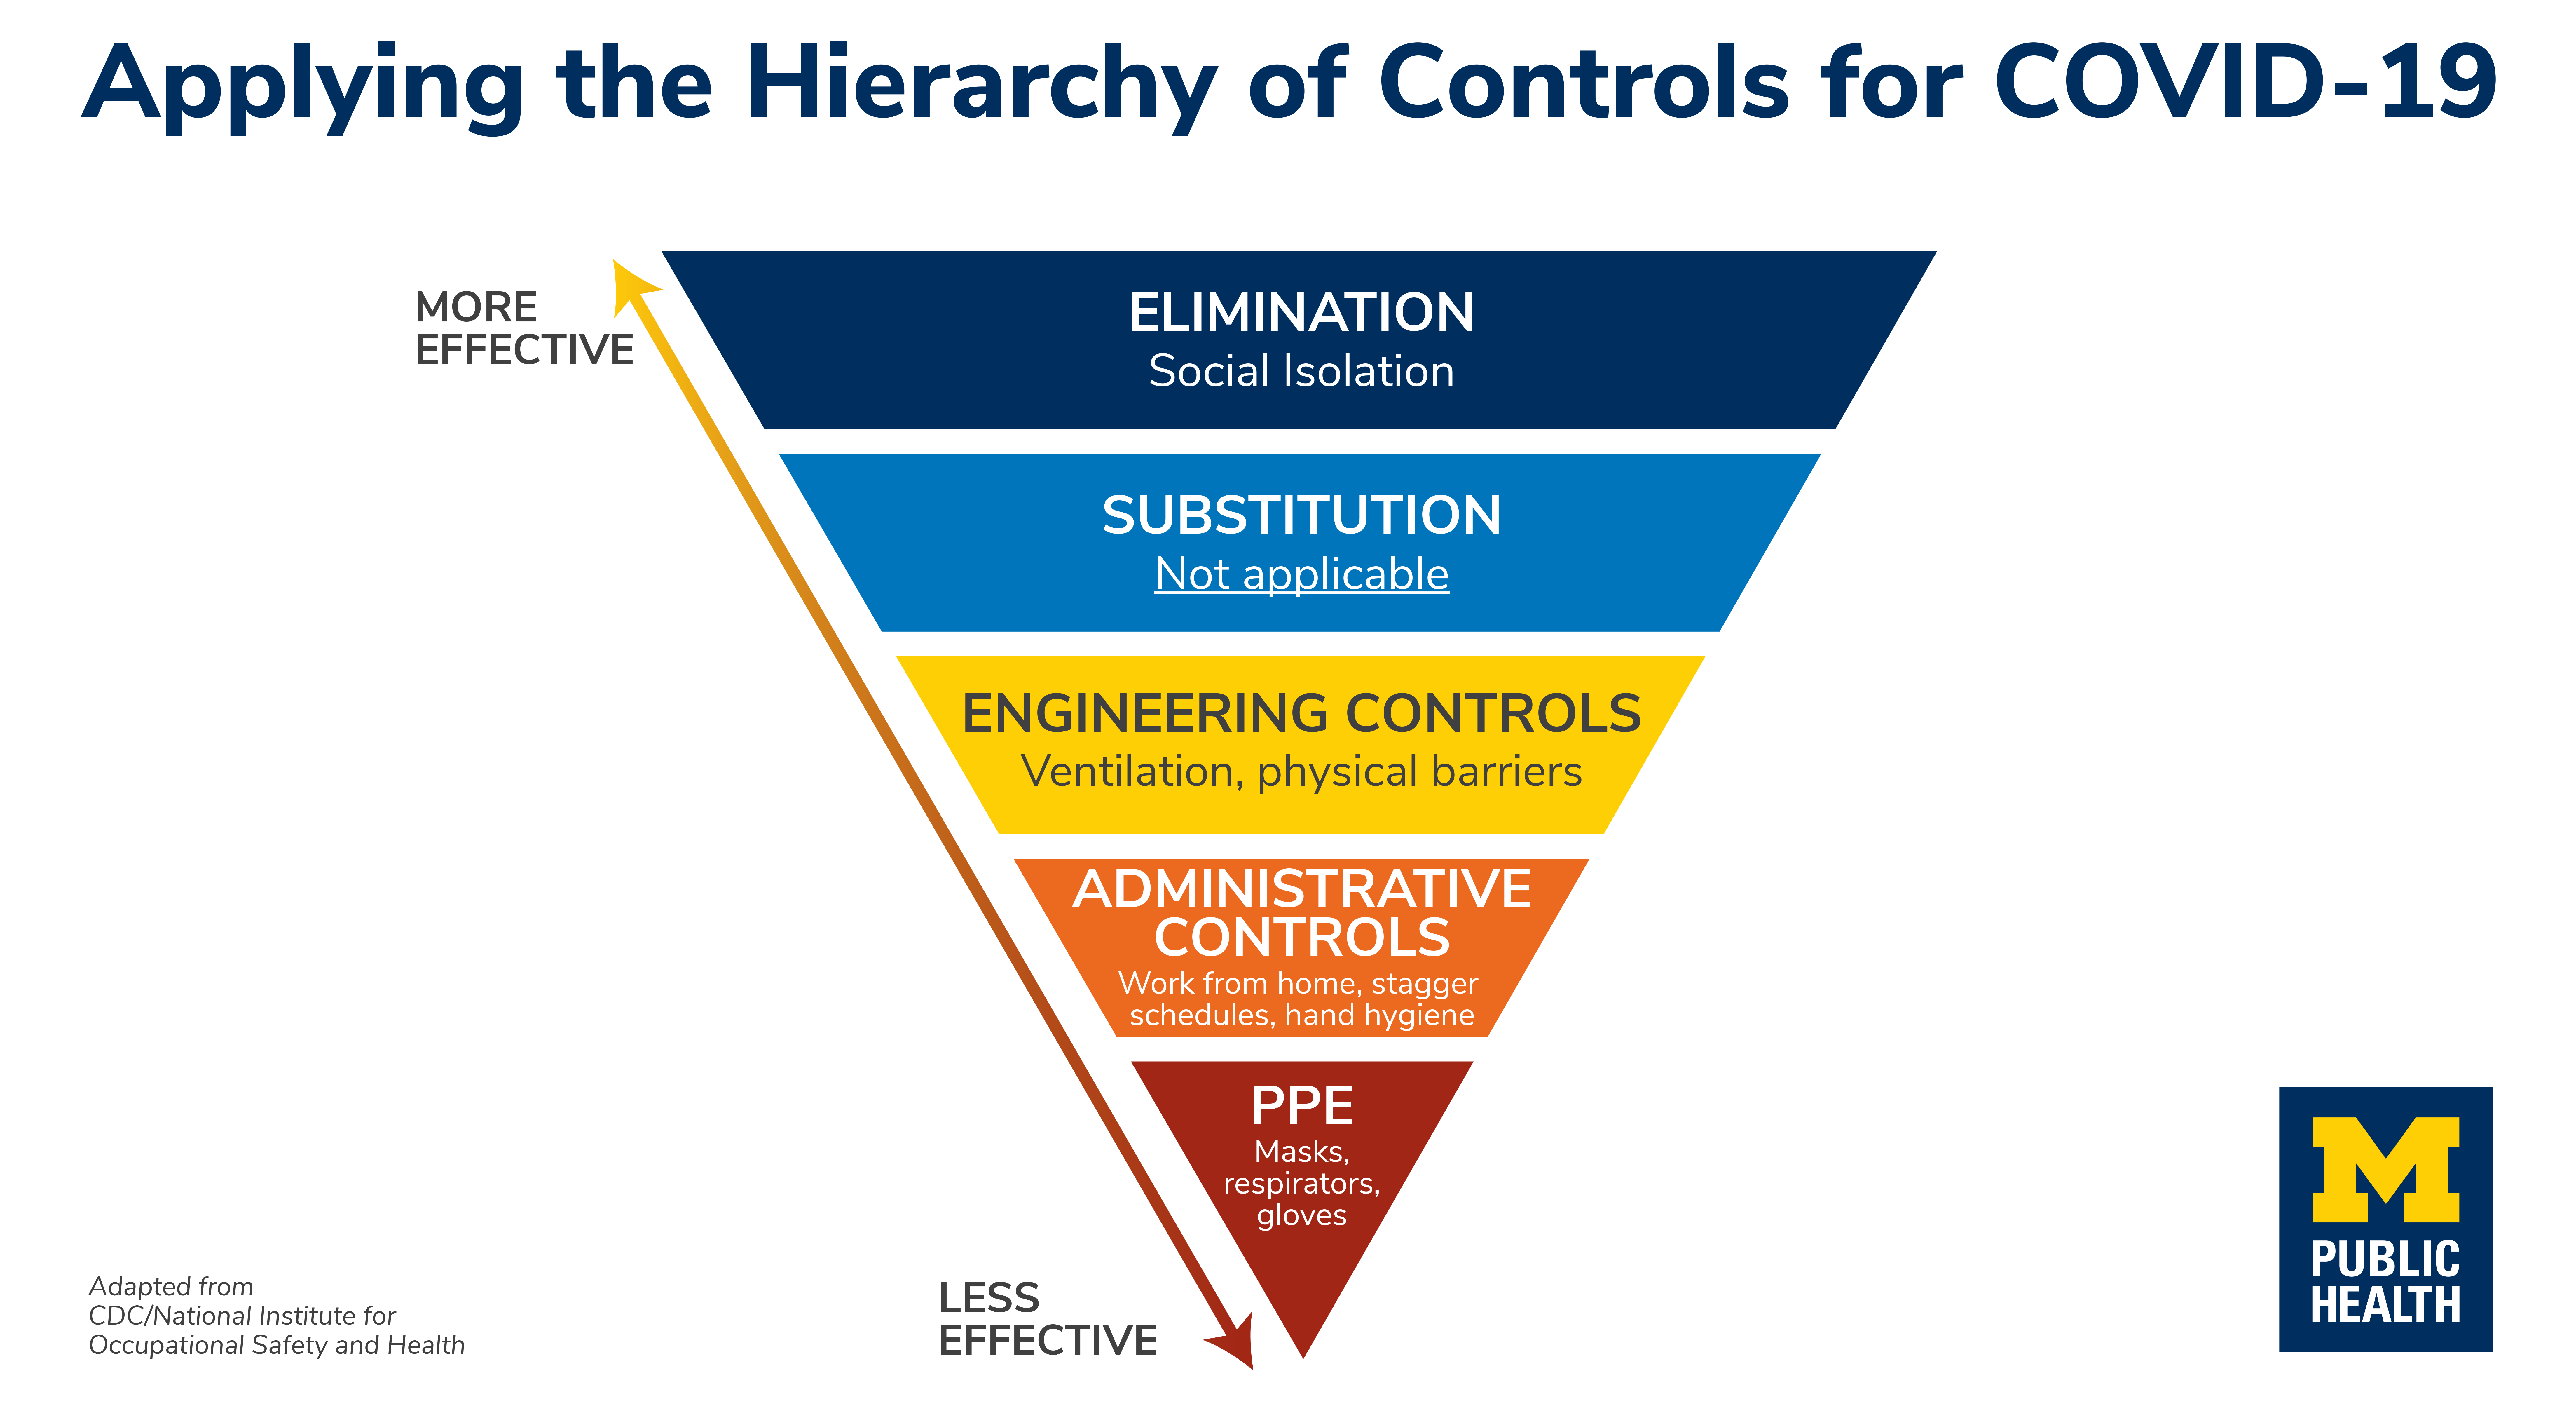 Illustration of applying the hierarchy of controls for COVID-19